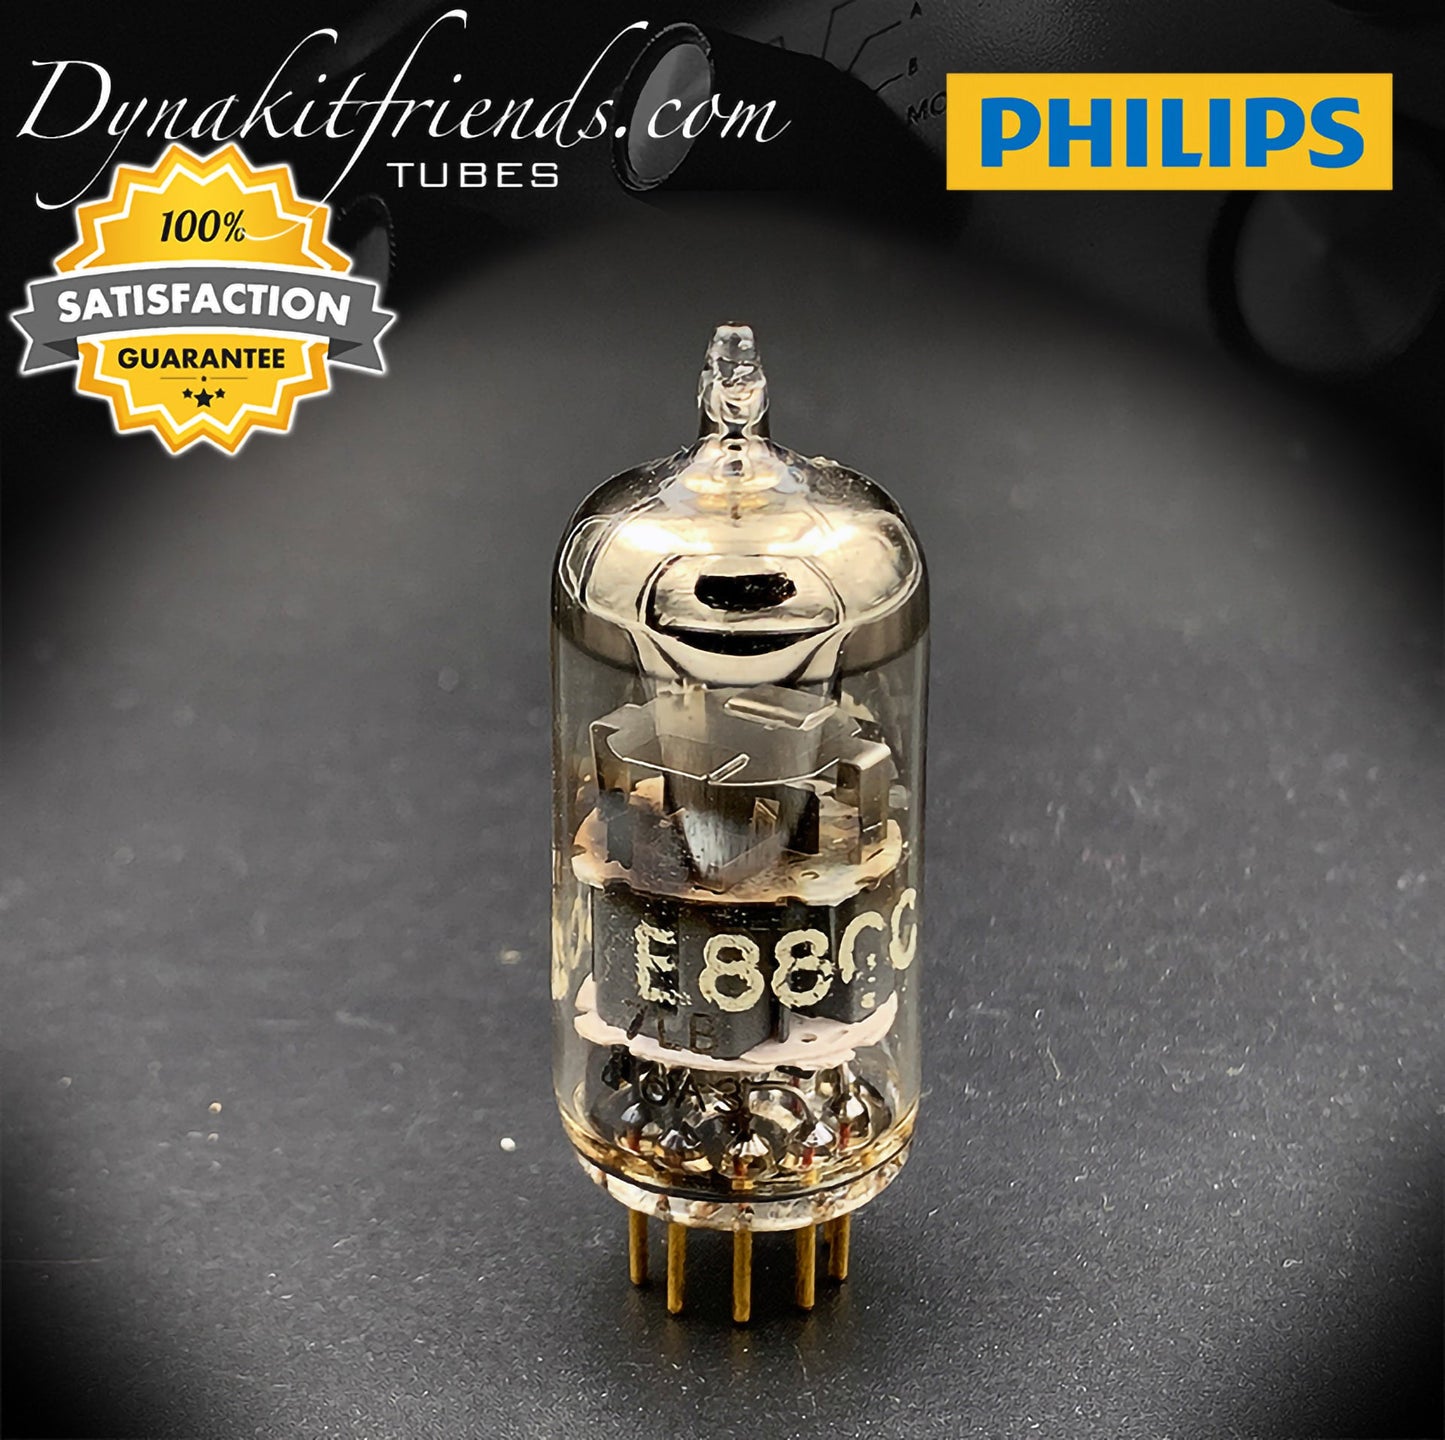 E88CC ( 6922 ) PHILIPS Special Quality Halo Getter Tube Gold Pin Made in Holland